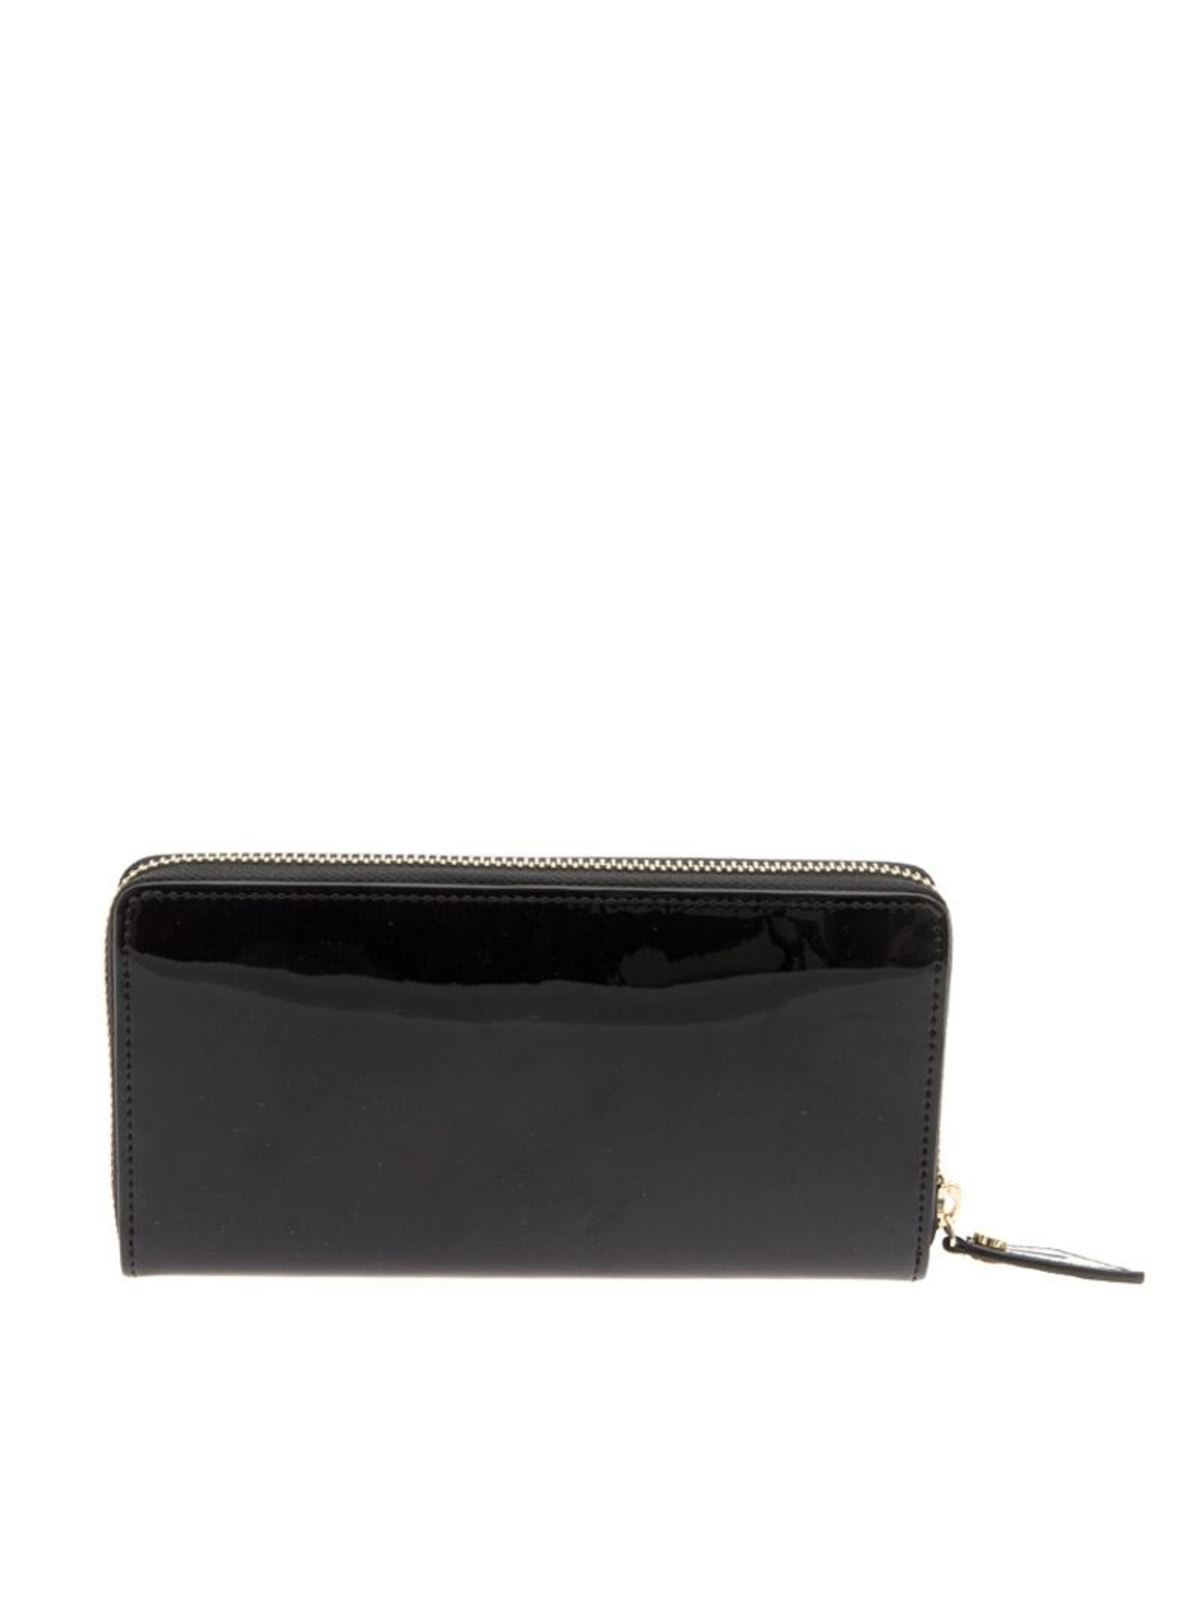 Shop Vivienne Westwood Anglomania Kelly Wallet In Negro